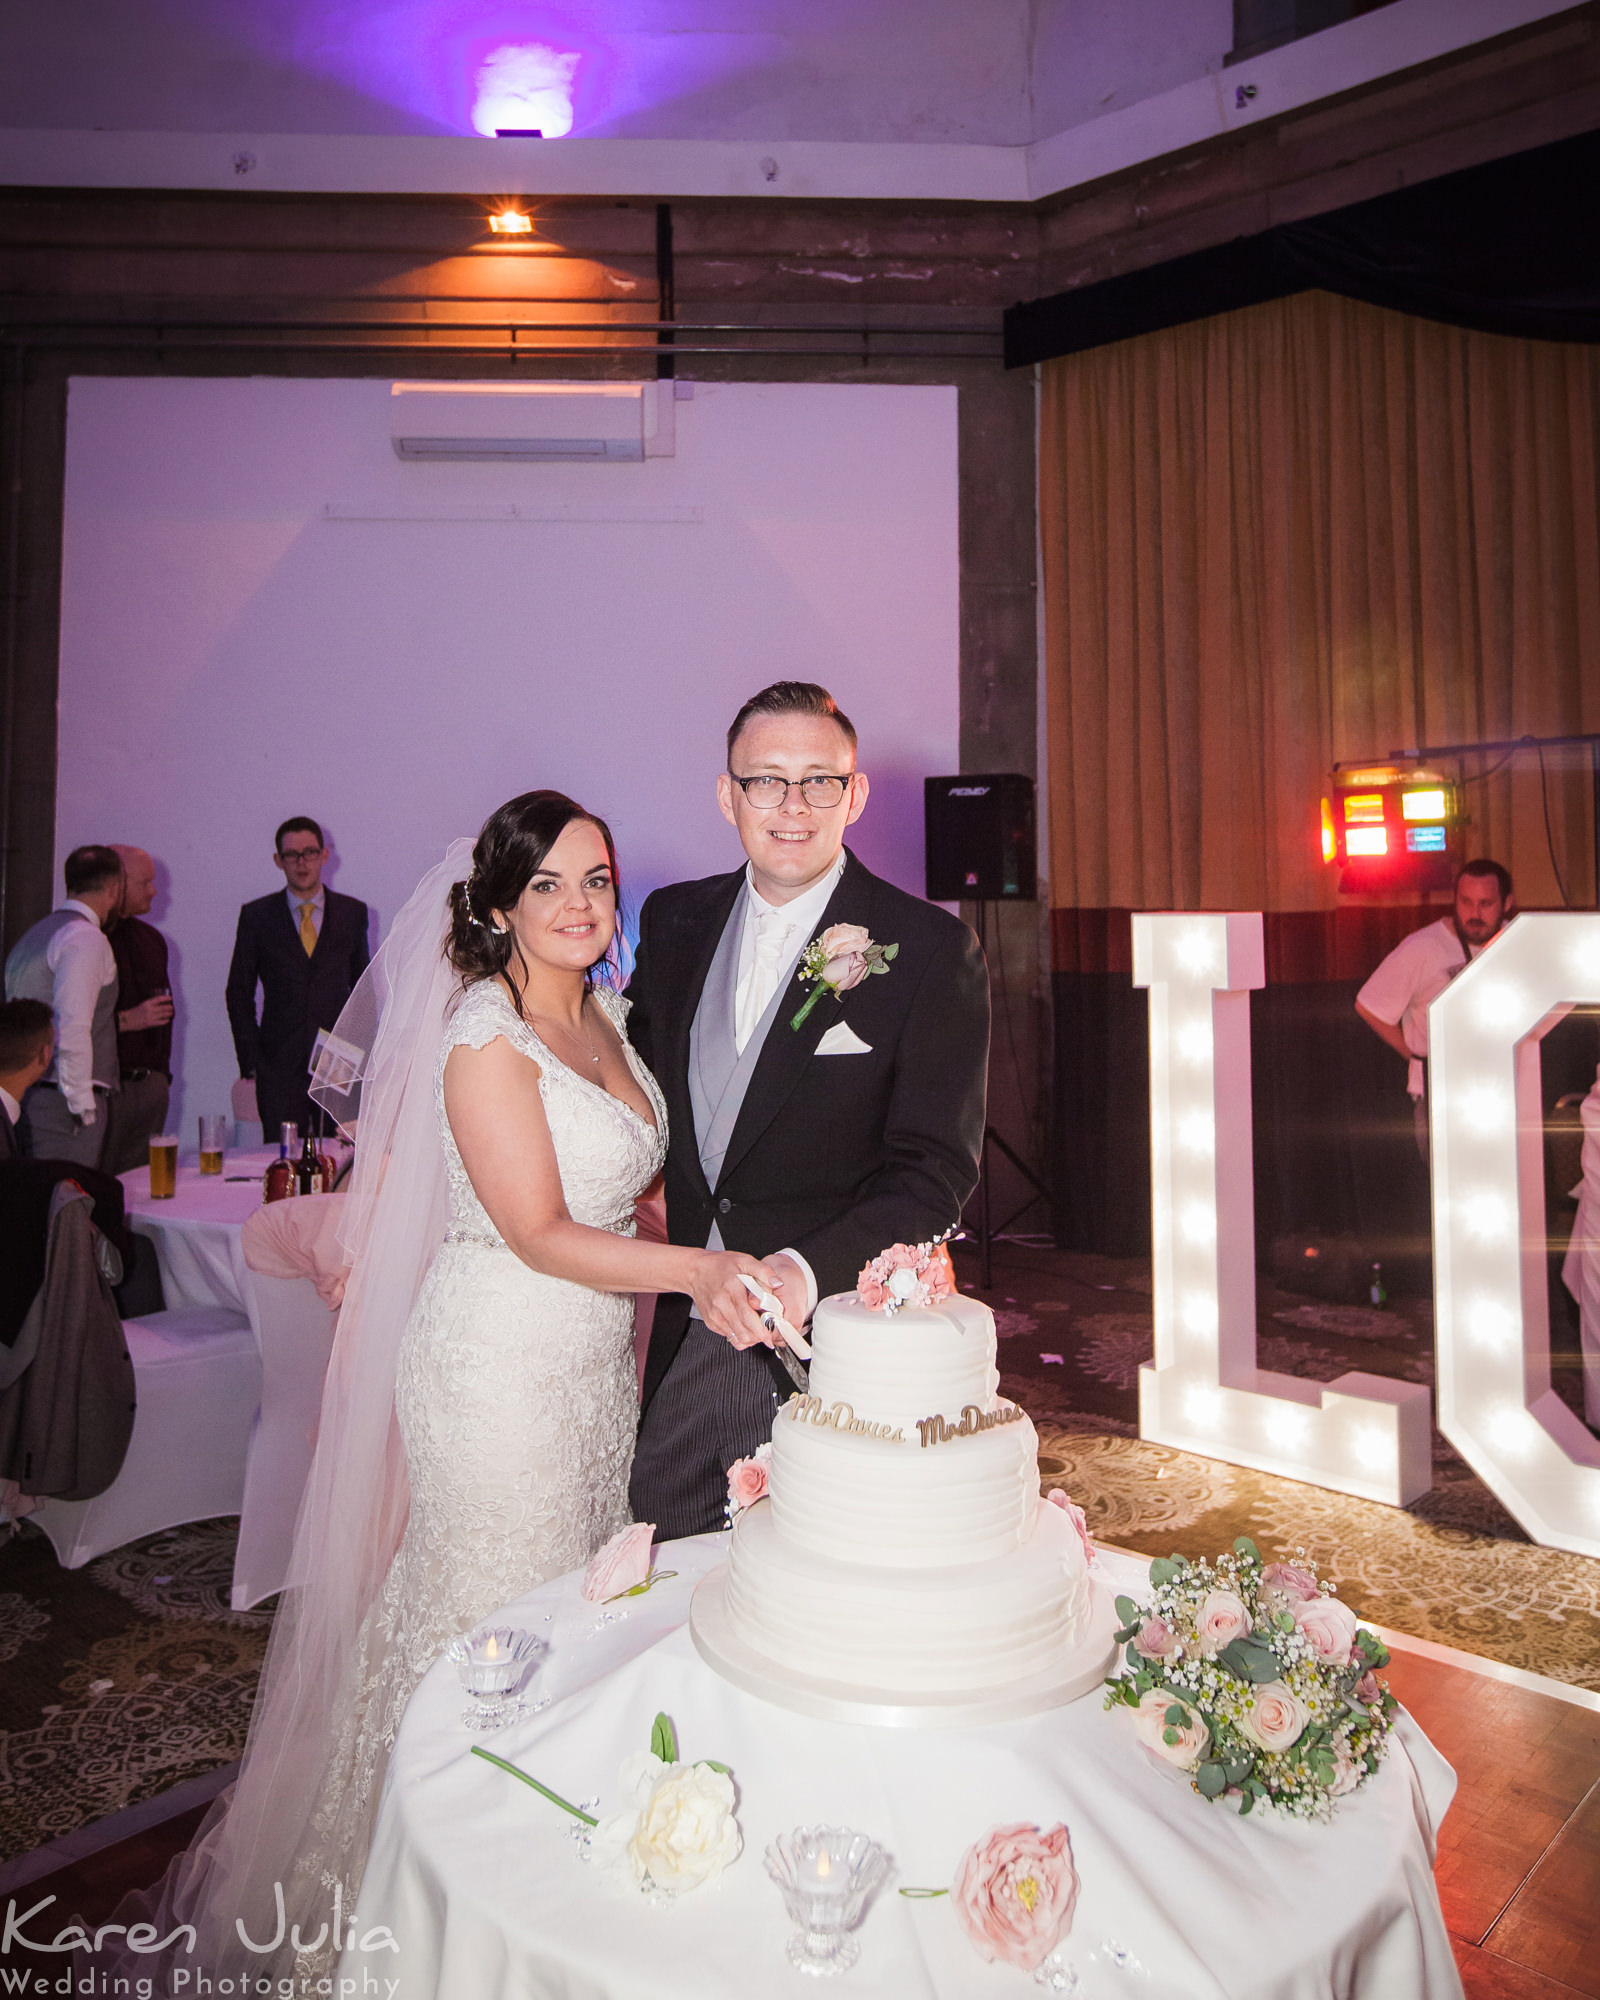 bride and groom cut the cake in the Tilden suite at their Springtime Shrigley Hall Wedding